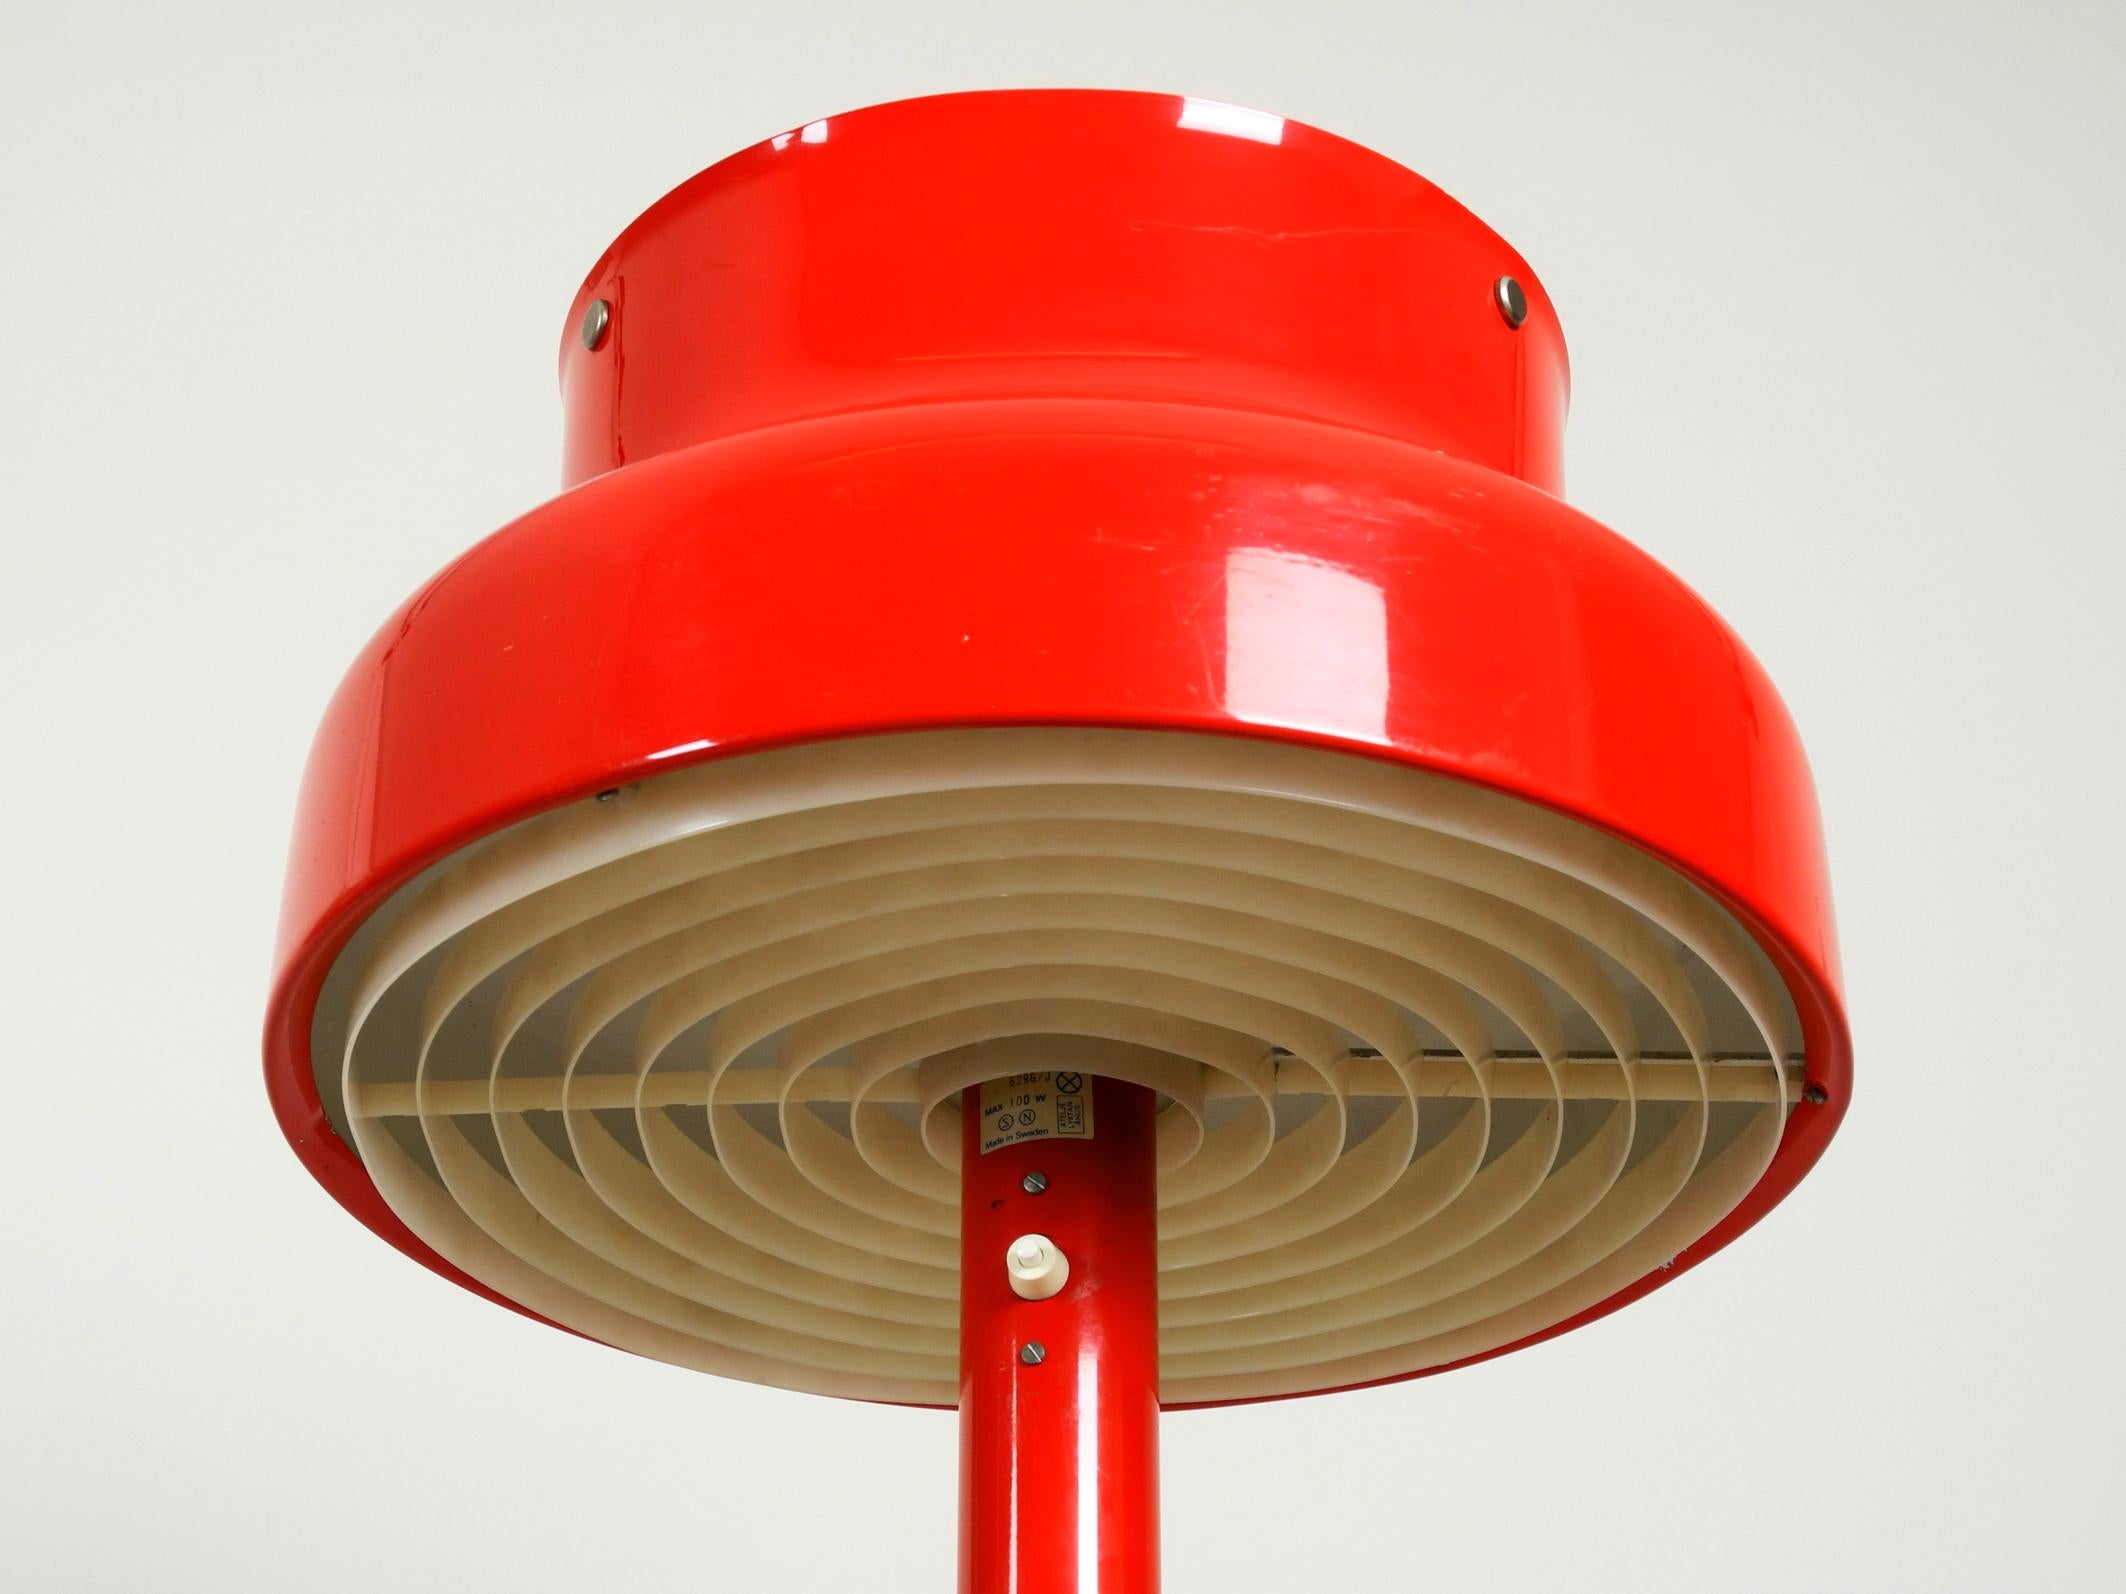 Space Age 1960s Bumling Floor Lamp in Red, Design 1968 by Anders Pehrson for Ateljé Lyktan